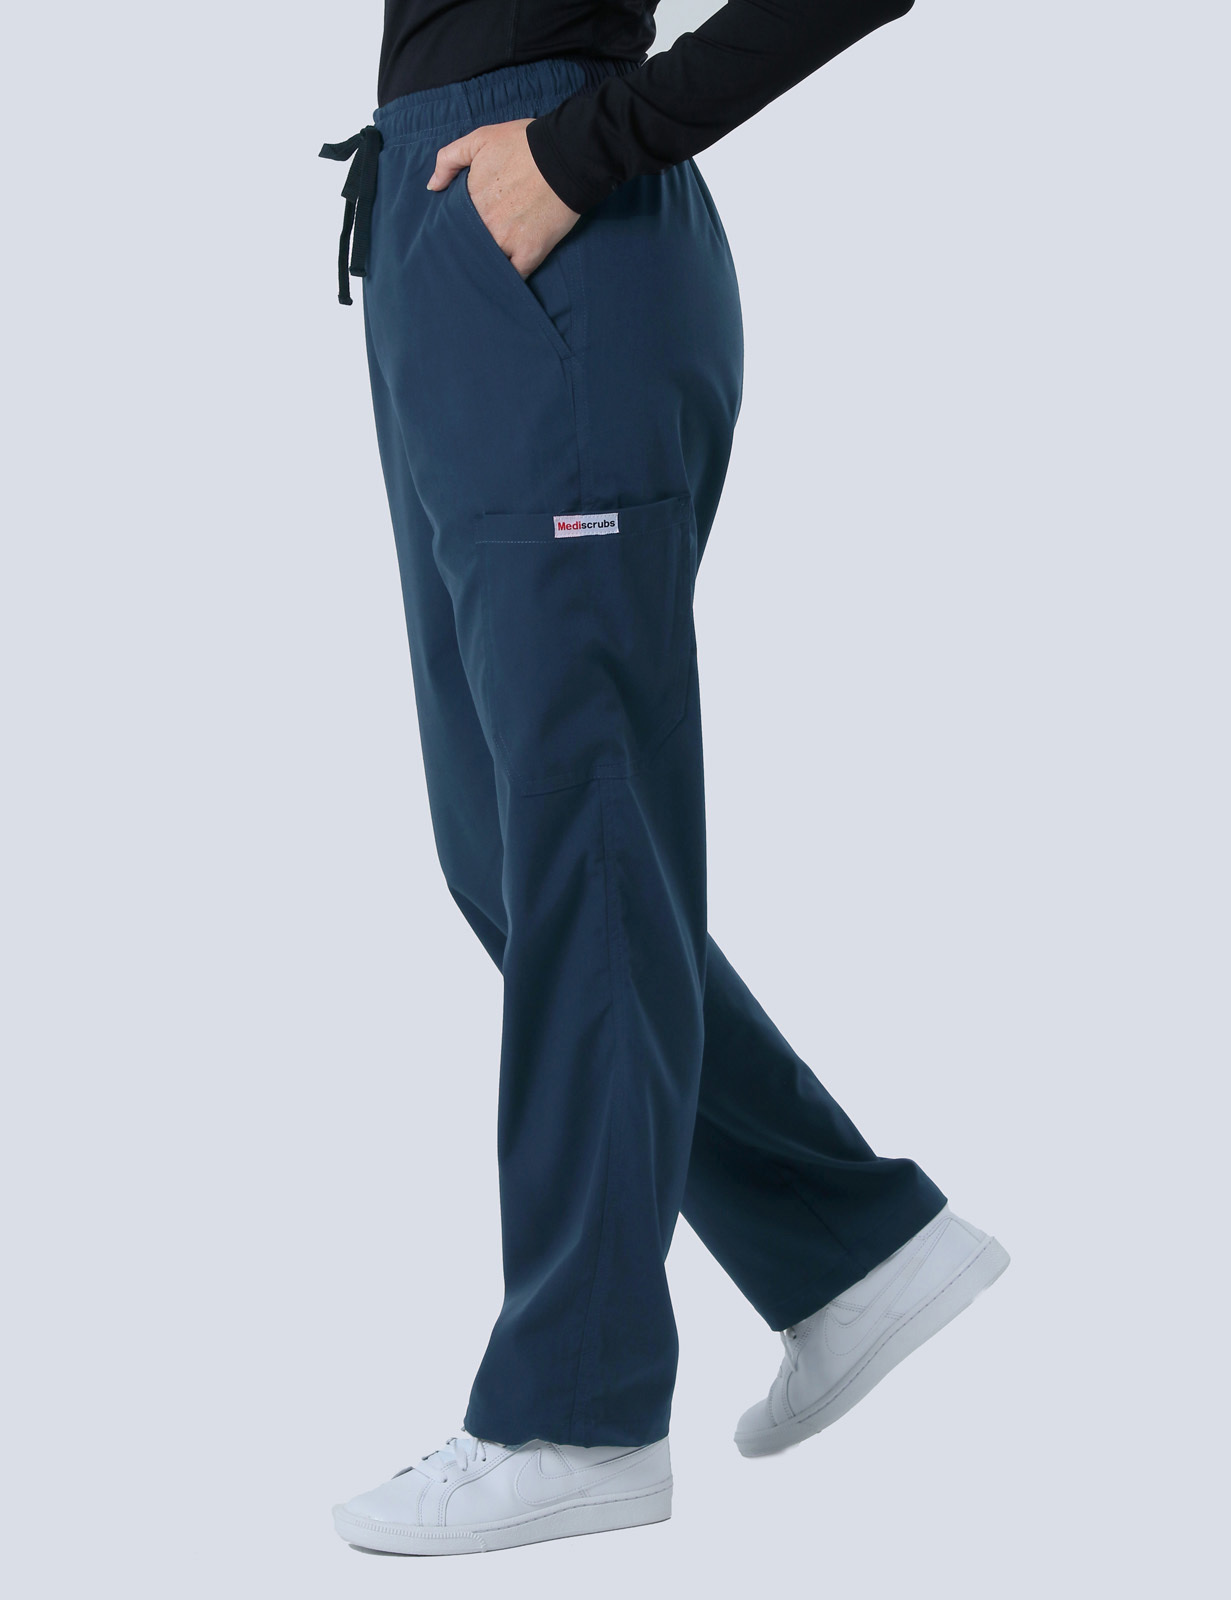 Mackay Hospital - ED RN (Women's Fit Spandex Scrub Top and Cargo Pants in Navy incl Logos)